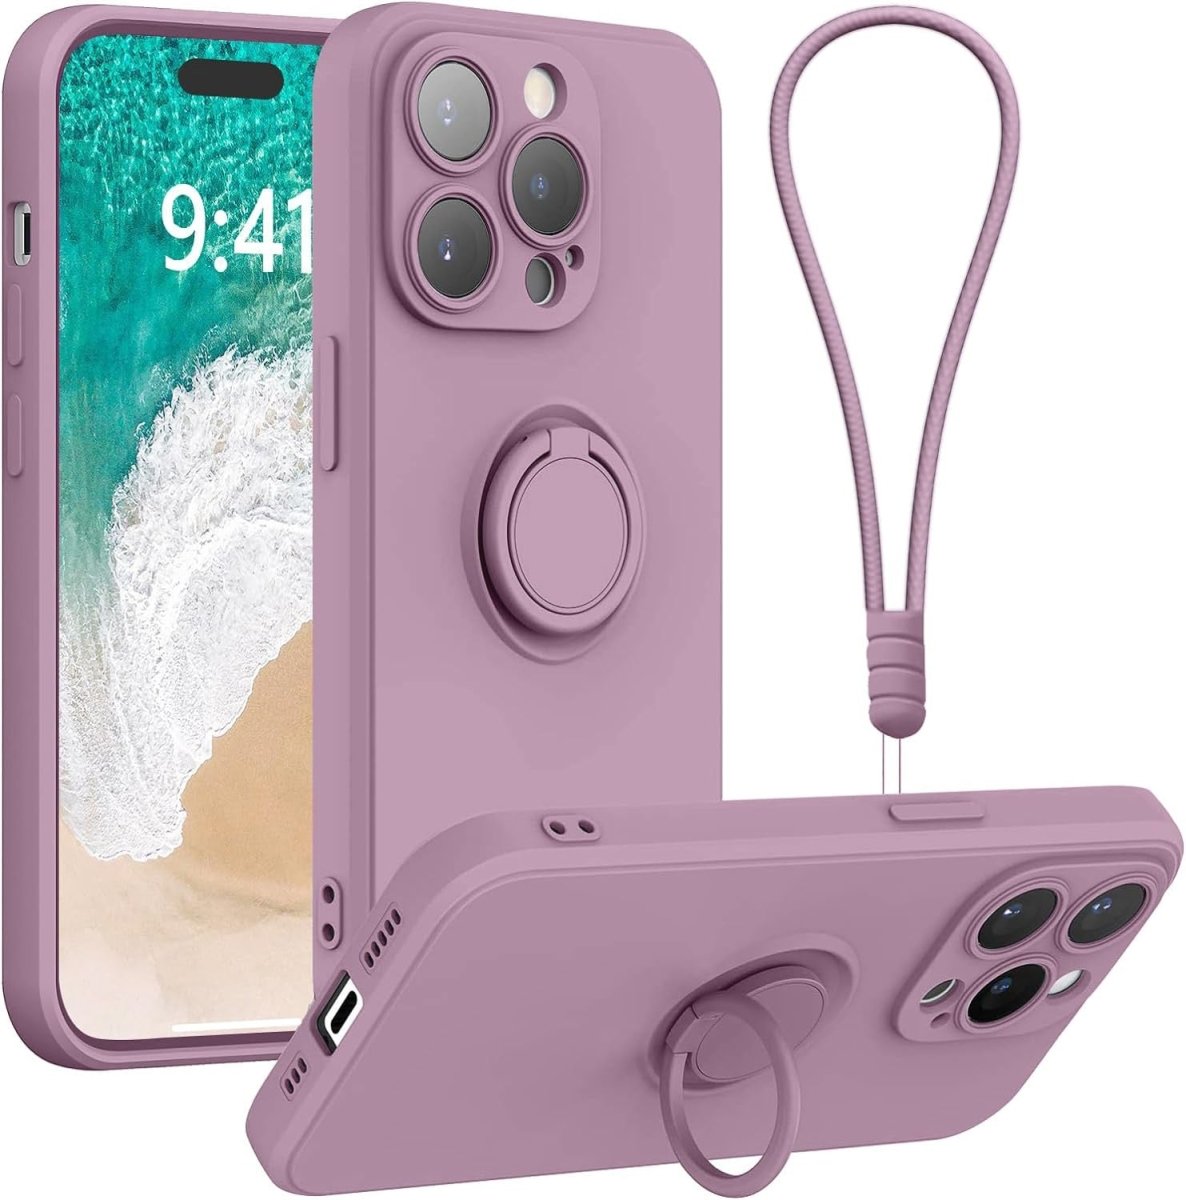 Light Purple Shockproof Silicone Case For iPhone With Ring And Lanyard  Light Purple iPhone 11 Accessories Gifts UK